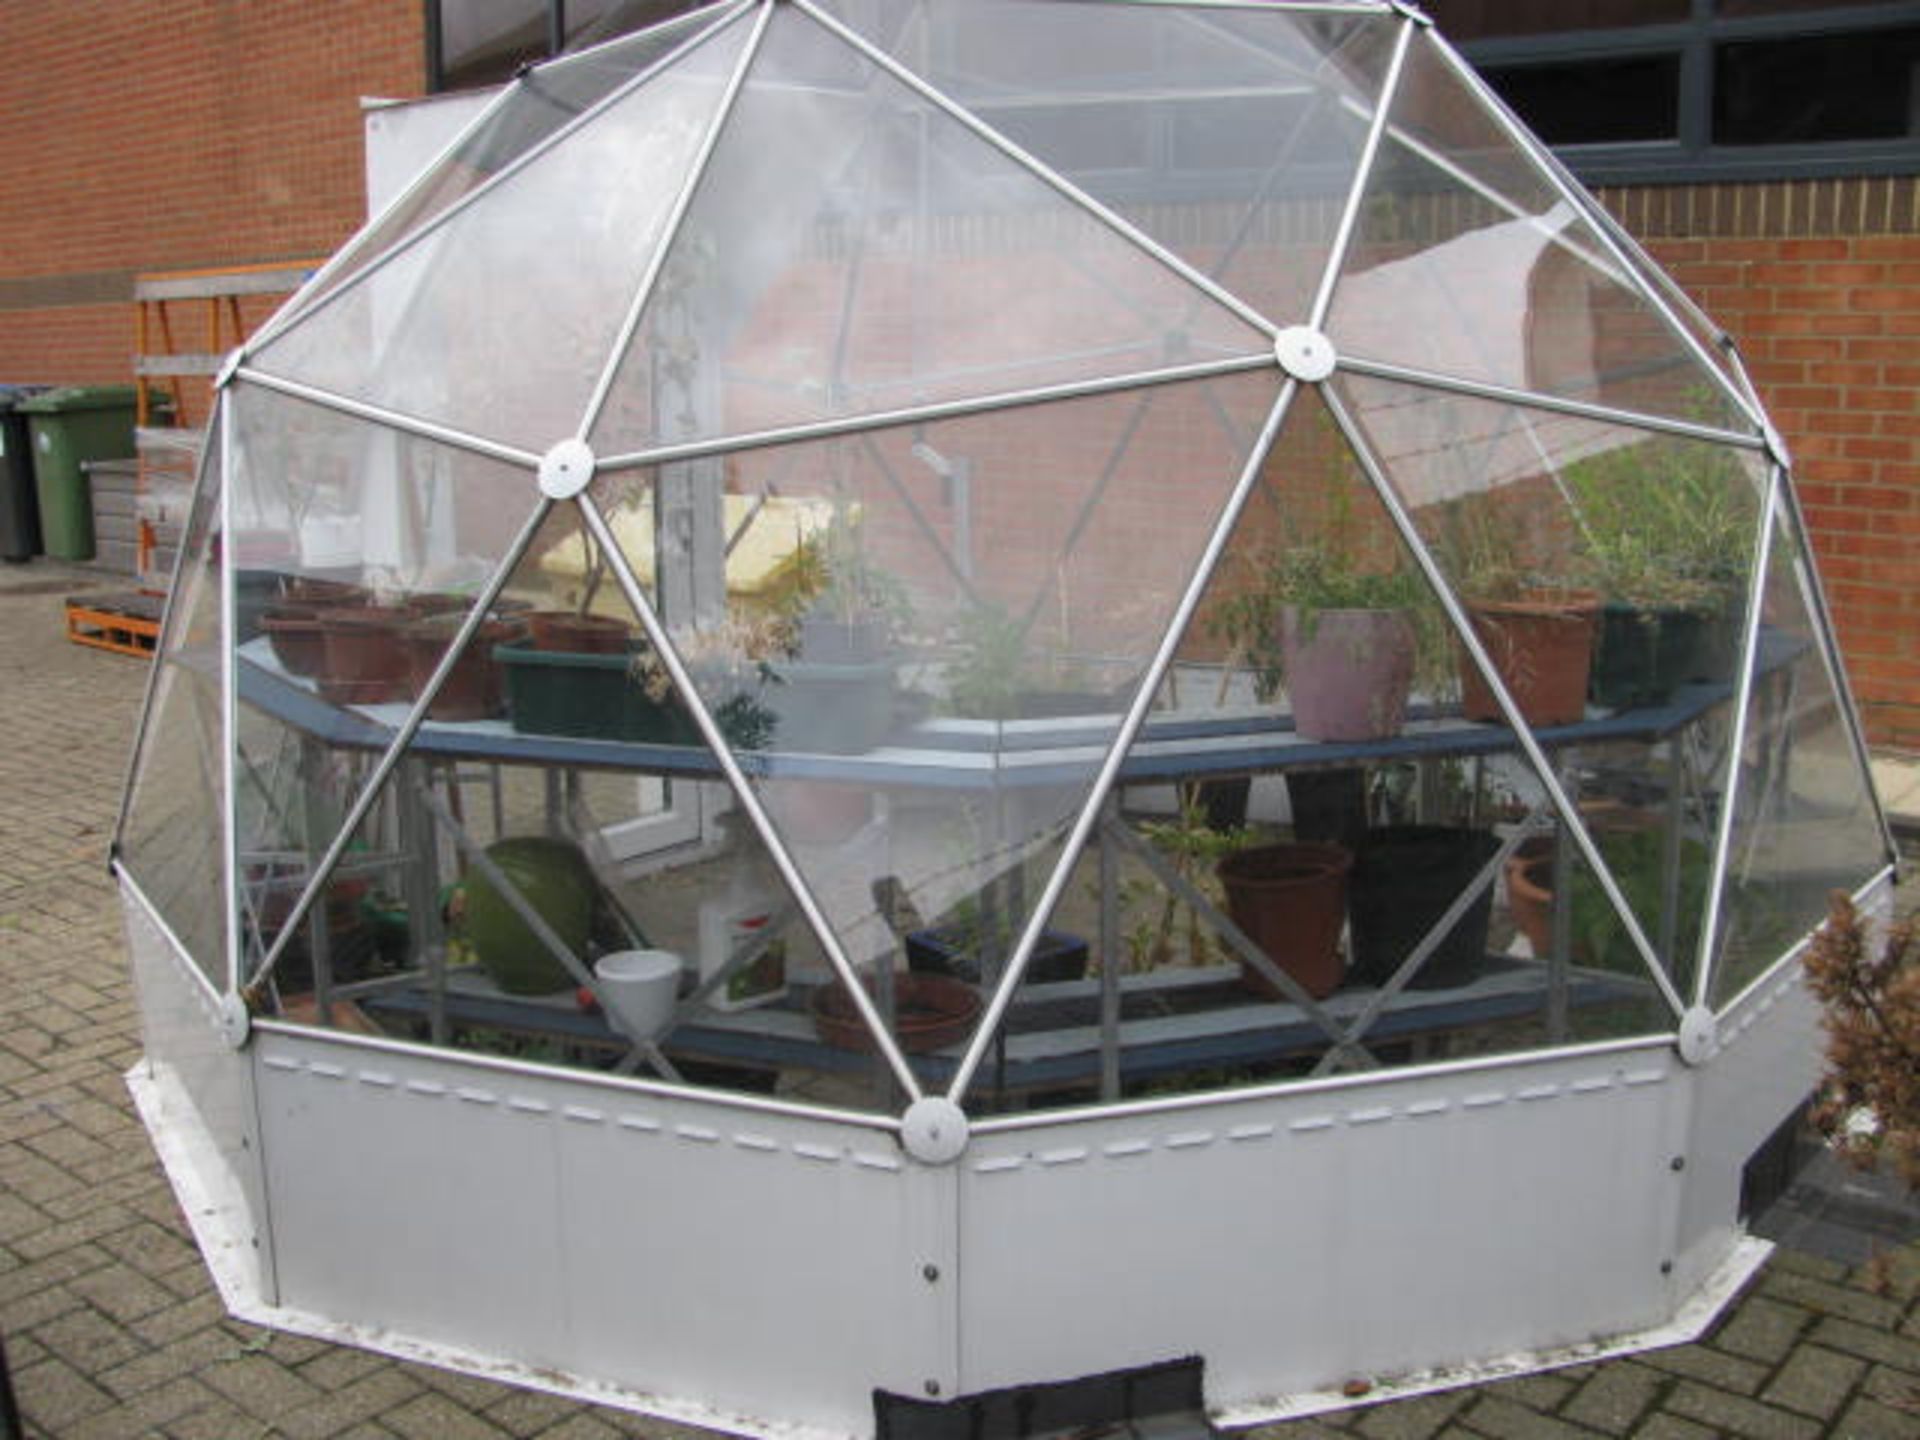 Geodesic dome green house - Image 5 of 7